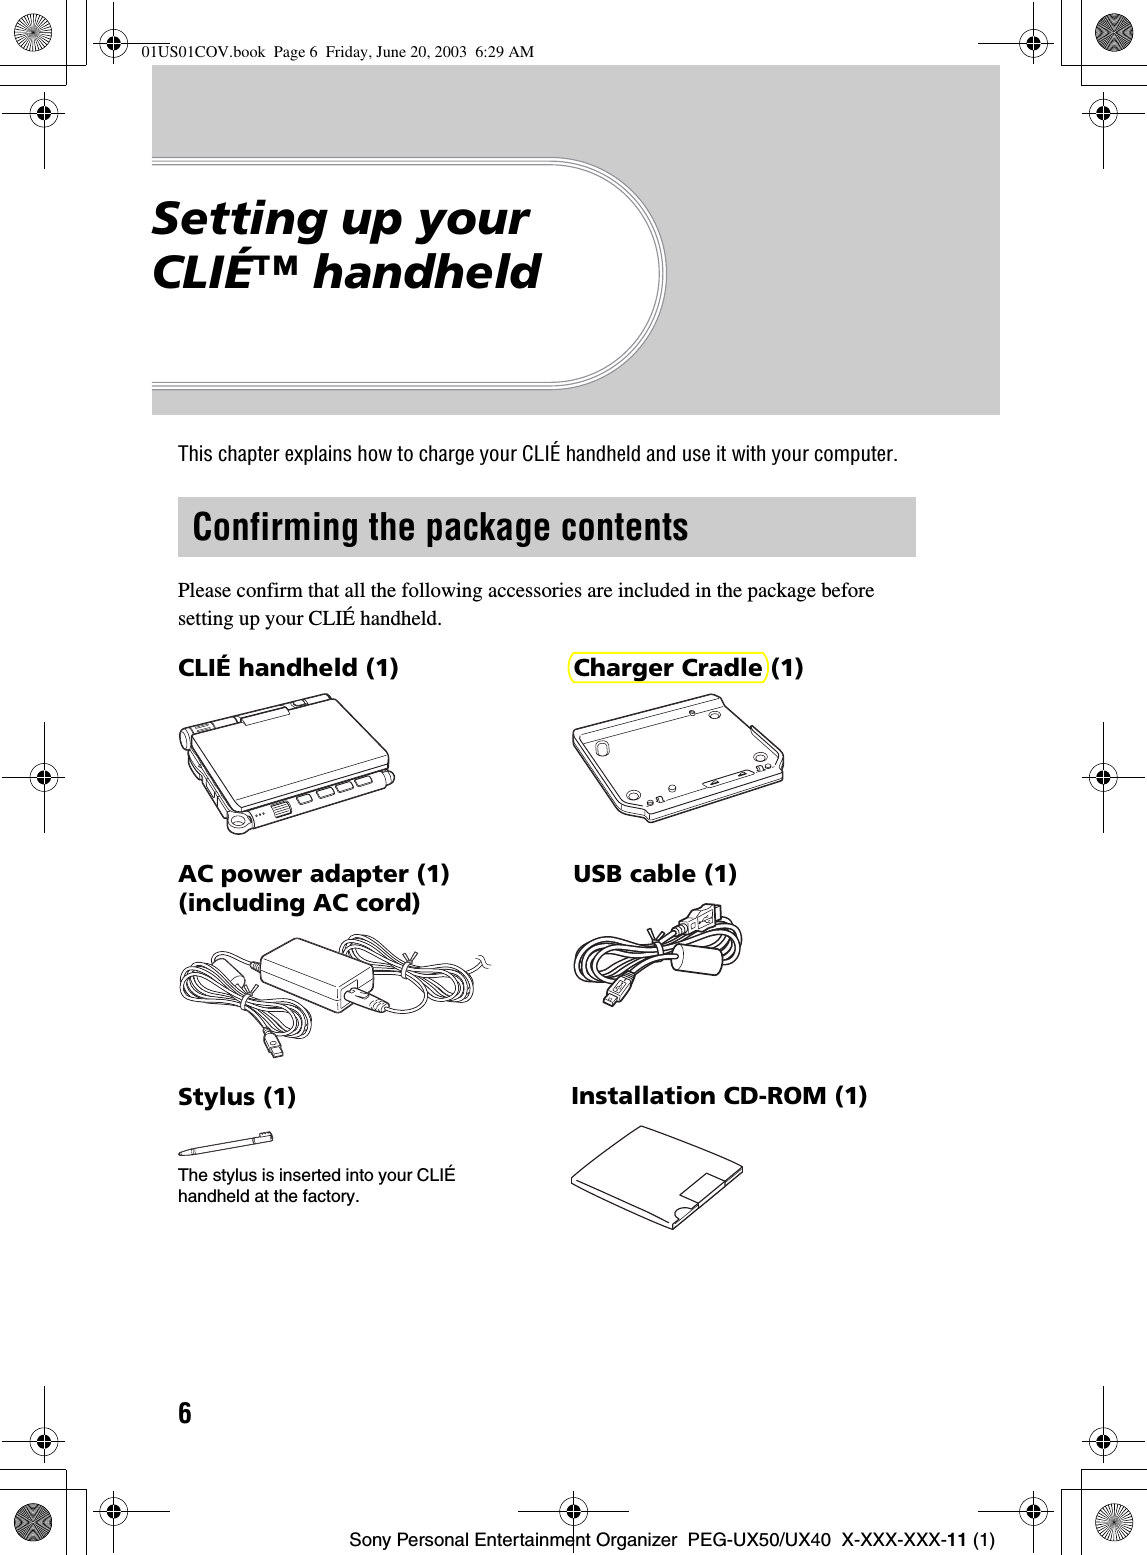 6Sony Personal Entertainment Organizer  PEG-UX50/UX40  X-XXX-XXX-11 (1)Setting up your CLIÉ™ handheldThis chapter explains how to charge your CLIÉ handheld and use it with your computer.Please confirm that all the following accessories are included in the package before setting up your CLIÉ handheld.Confirming the package contentsCLIÉ handheld (1) Charger Cradle (1)AC power adapter (1) (including AC cord)USB cable (1)Stylus (1)The stylus is inserted into your CLIÉ handheld at the factory.Installation CD-ROM (1)01US01COV.book  Page 6  Friday, June 20, 2003  6:29 AM